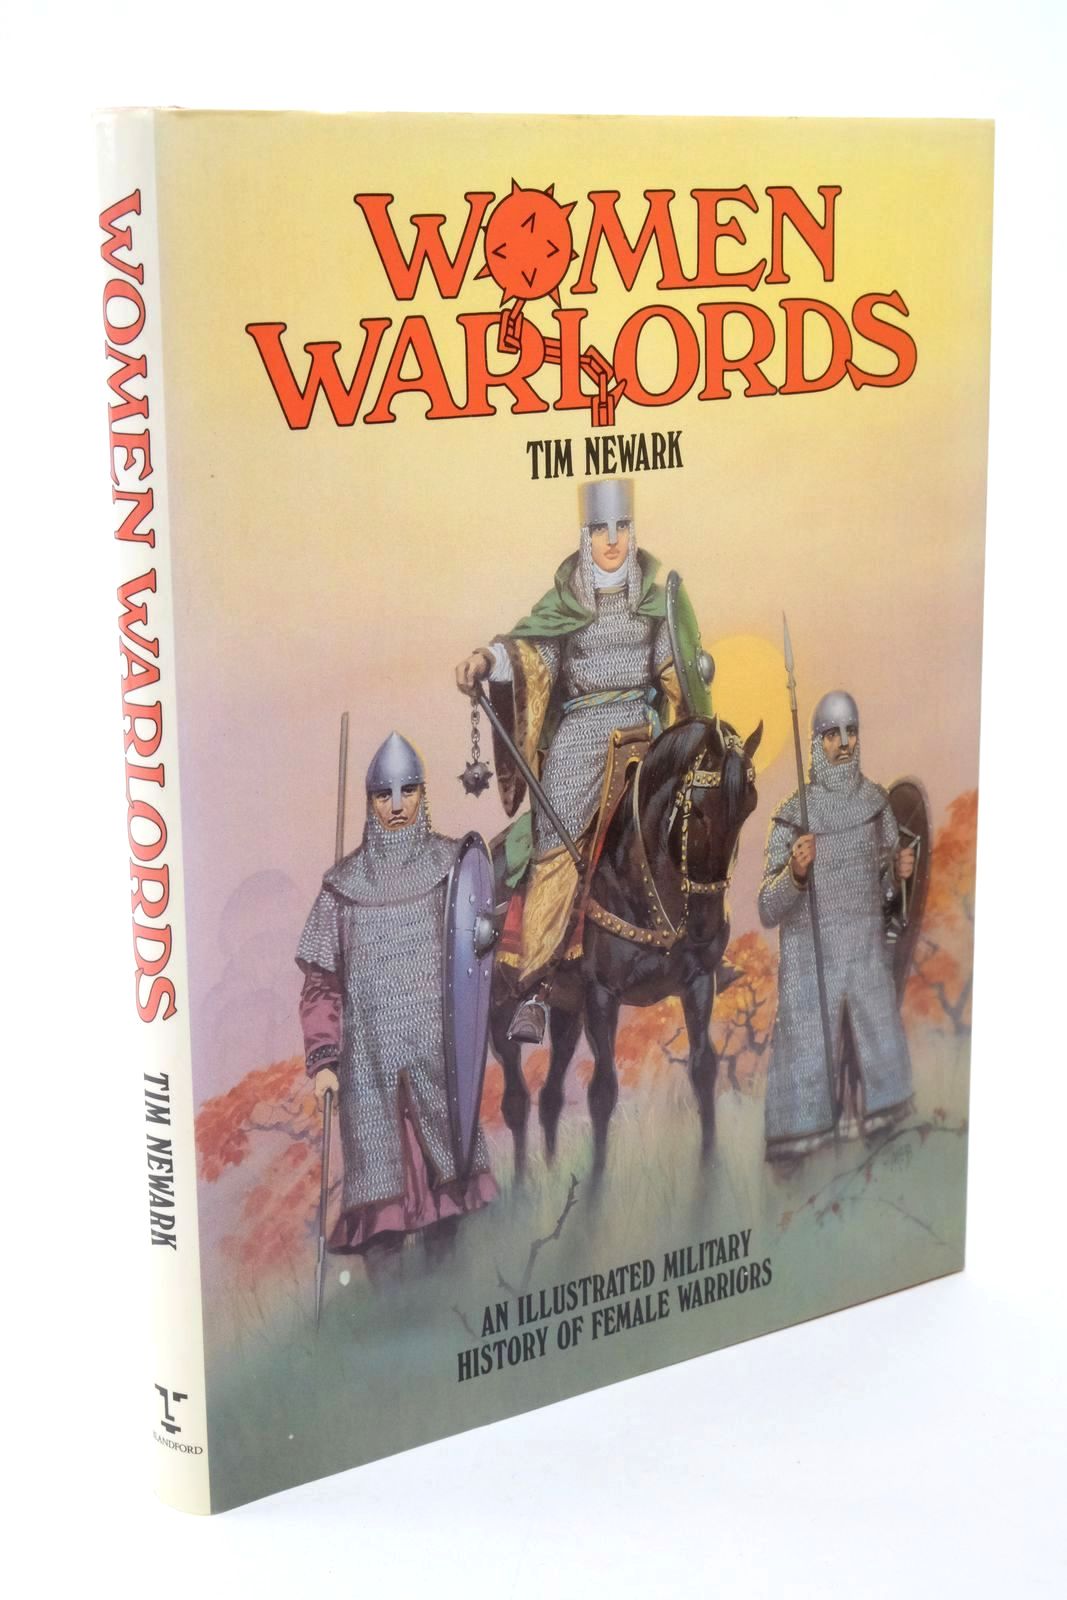 Photo of WOMEN WARLORDS AN ILLUSTRATRATED MILITARY HISTORY OF FEMALE WARRIORS written by Newark, Tim illustrated by McBride, Angus published by Blandford (STOCK CODE: 1322594)  for sale by Stella & Rose's Books